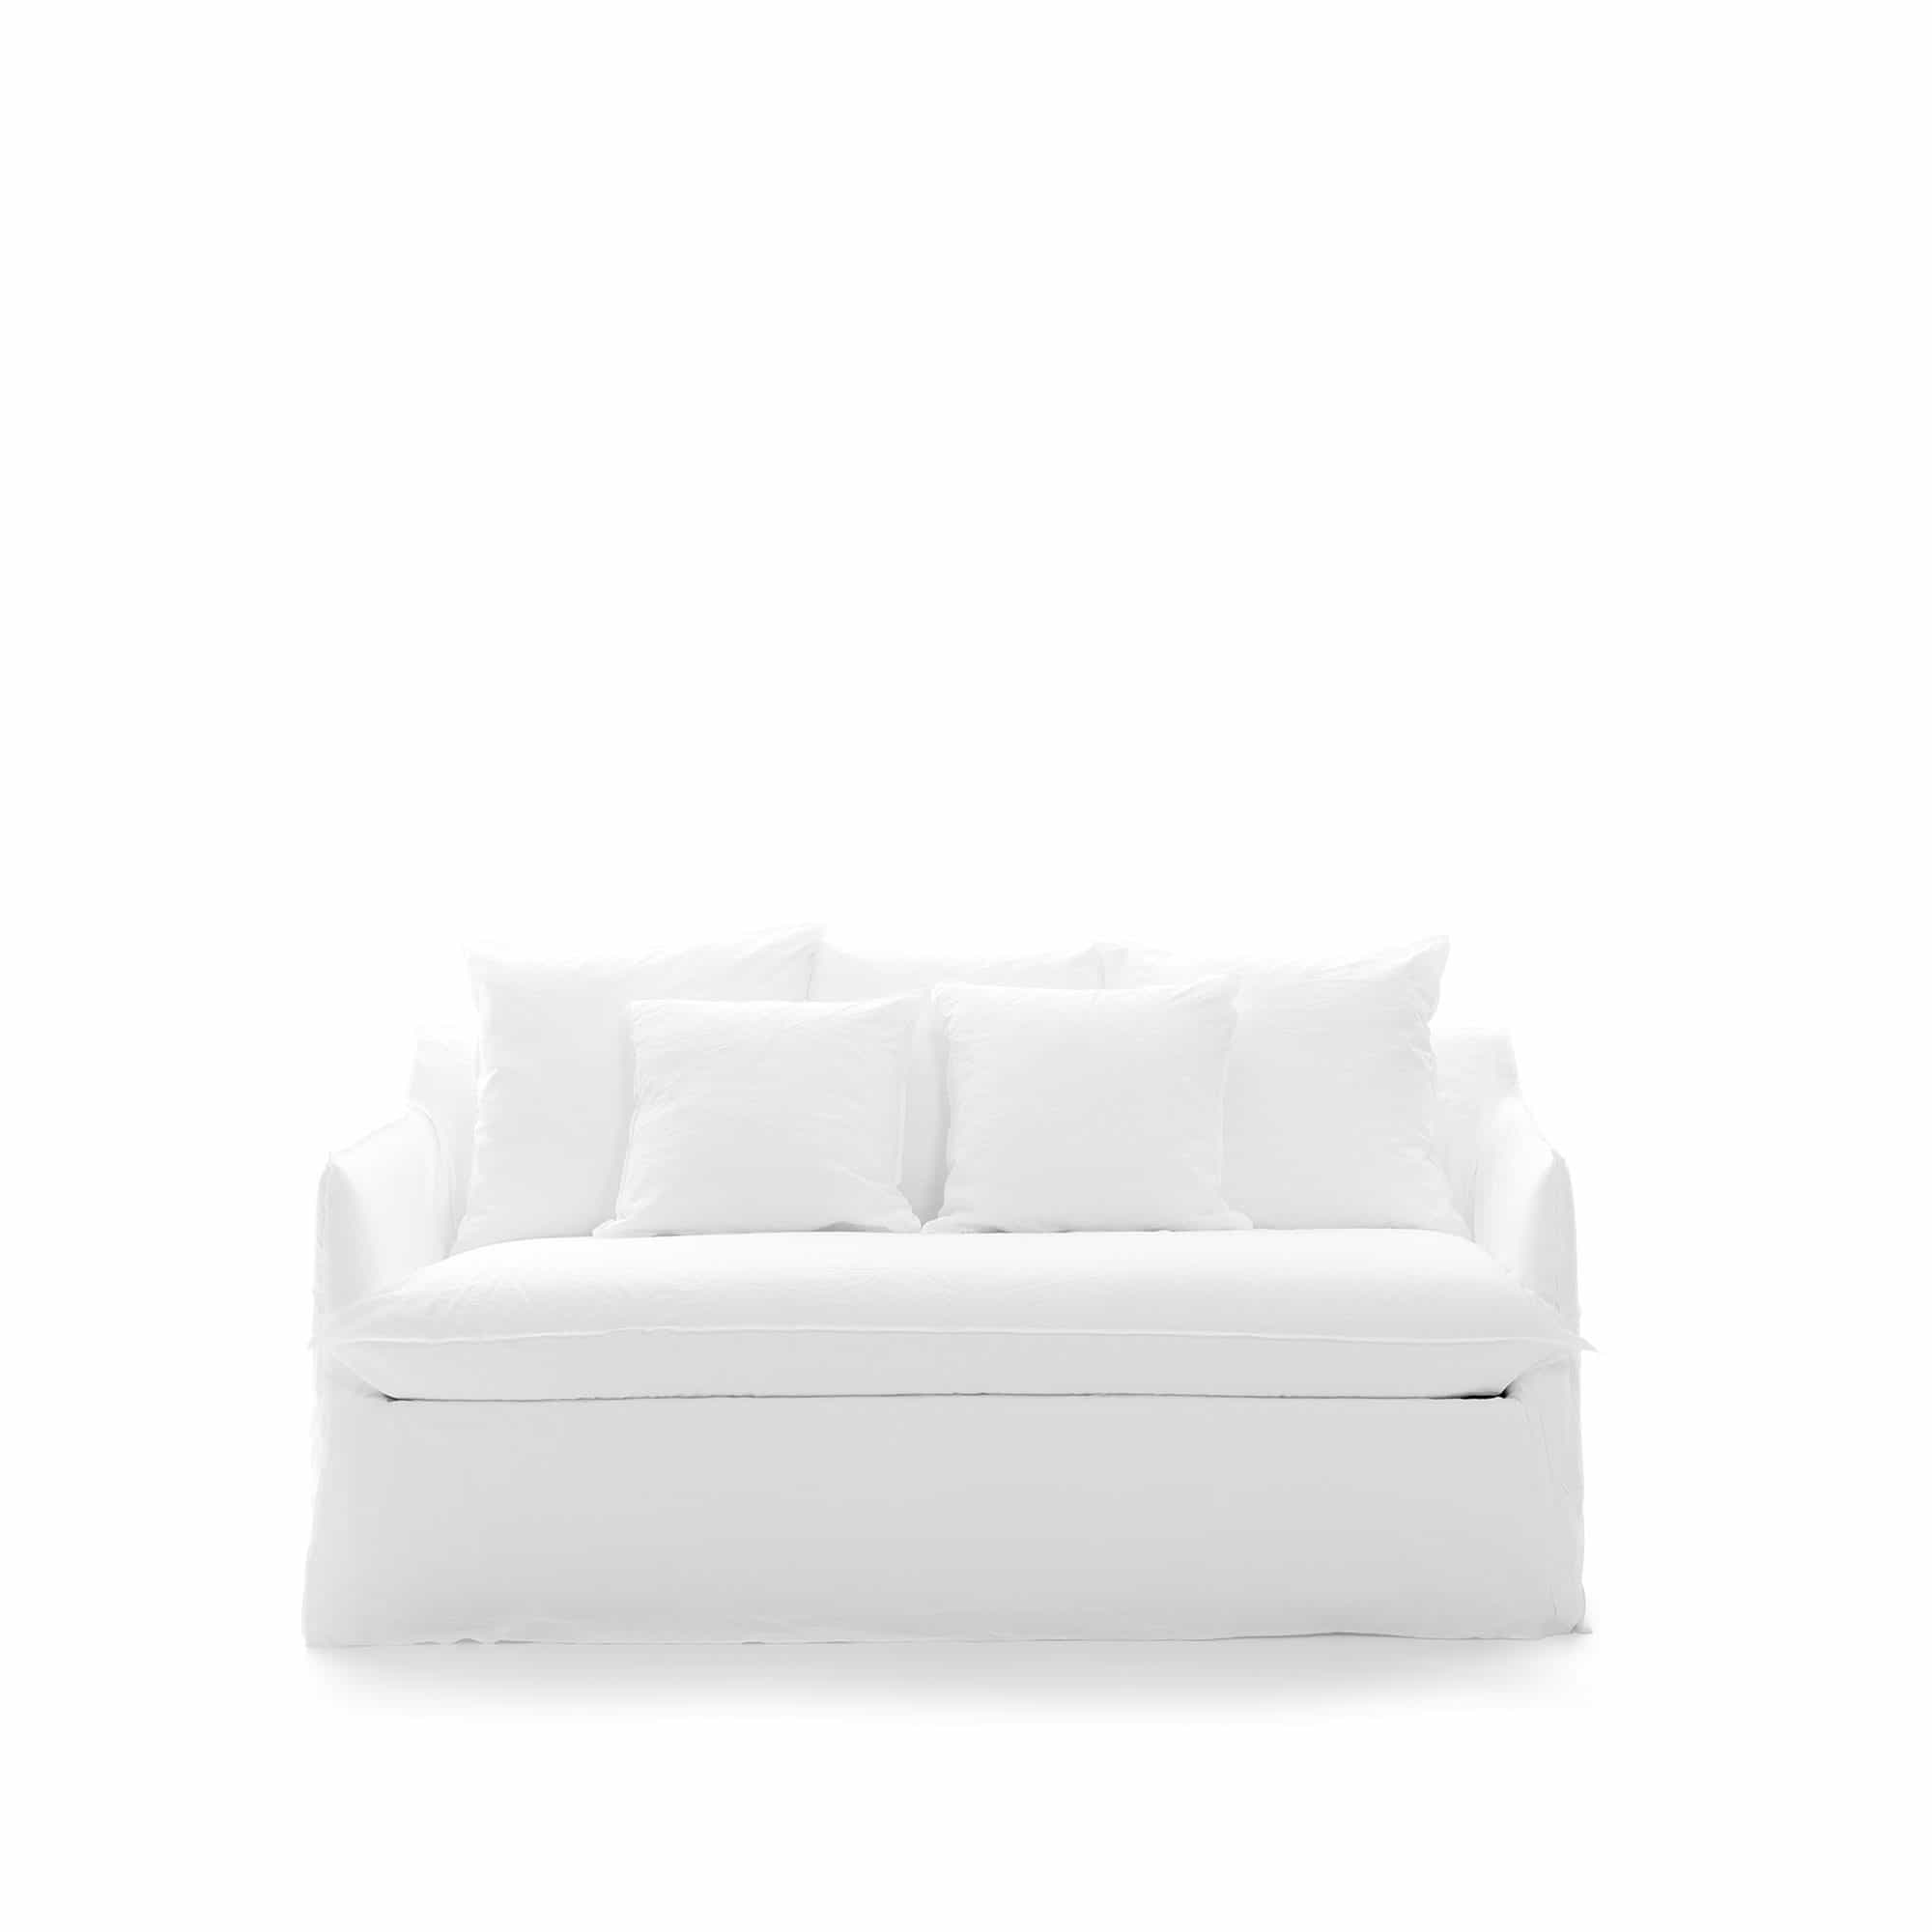 Ghost 13 Sofa-bed